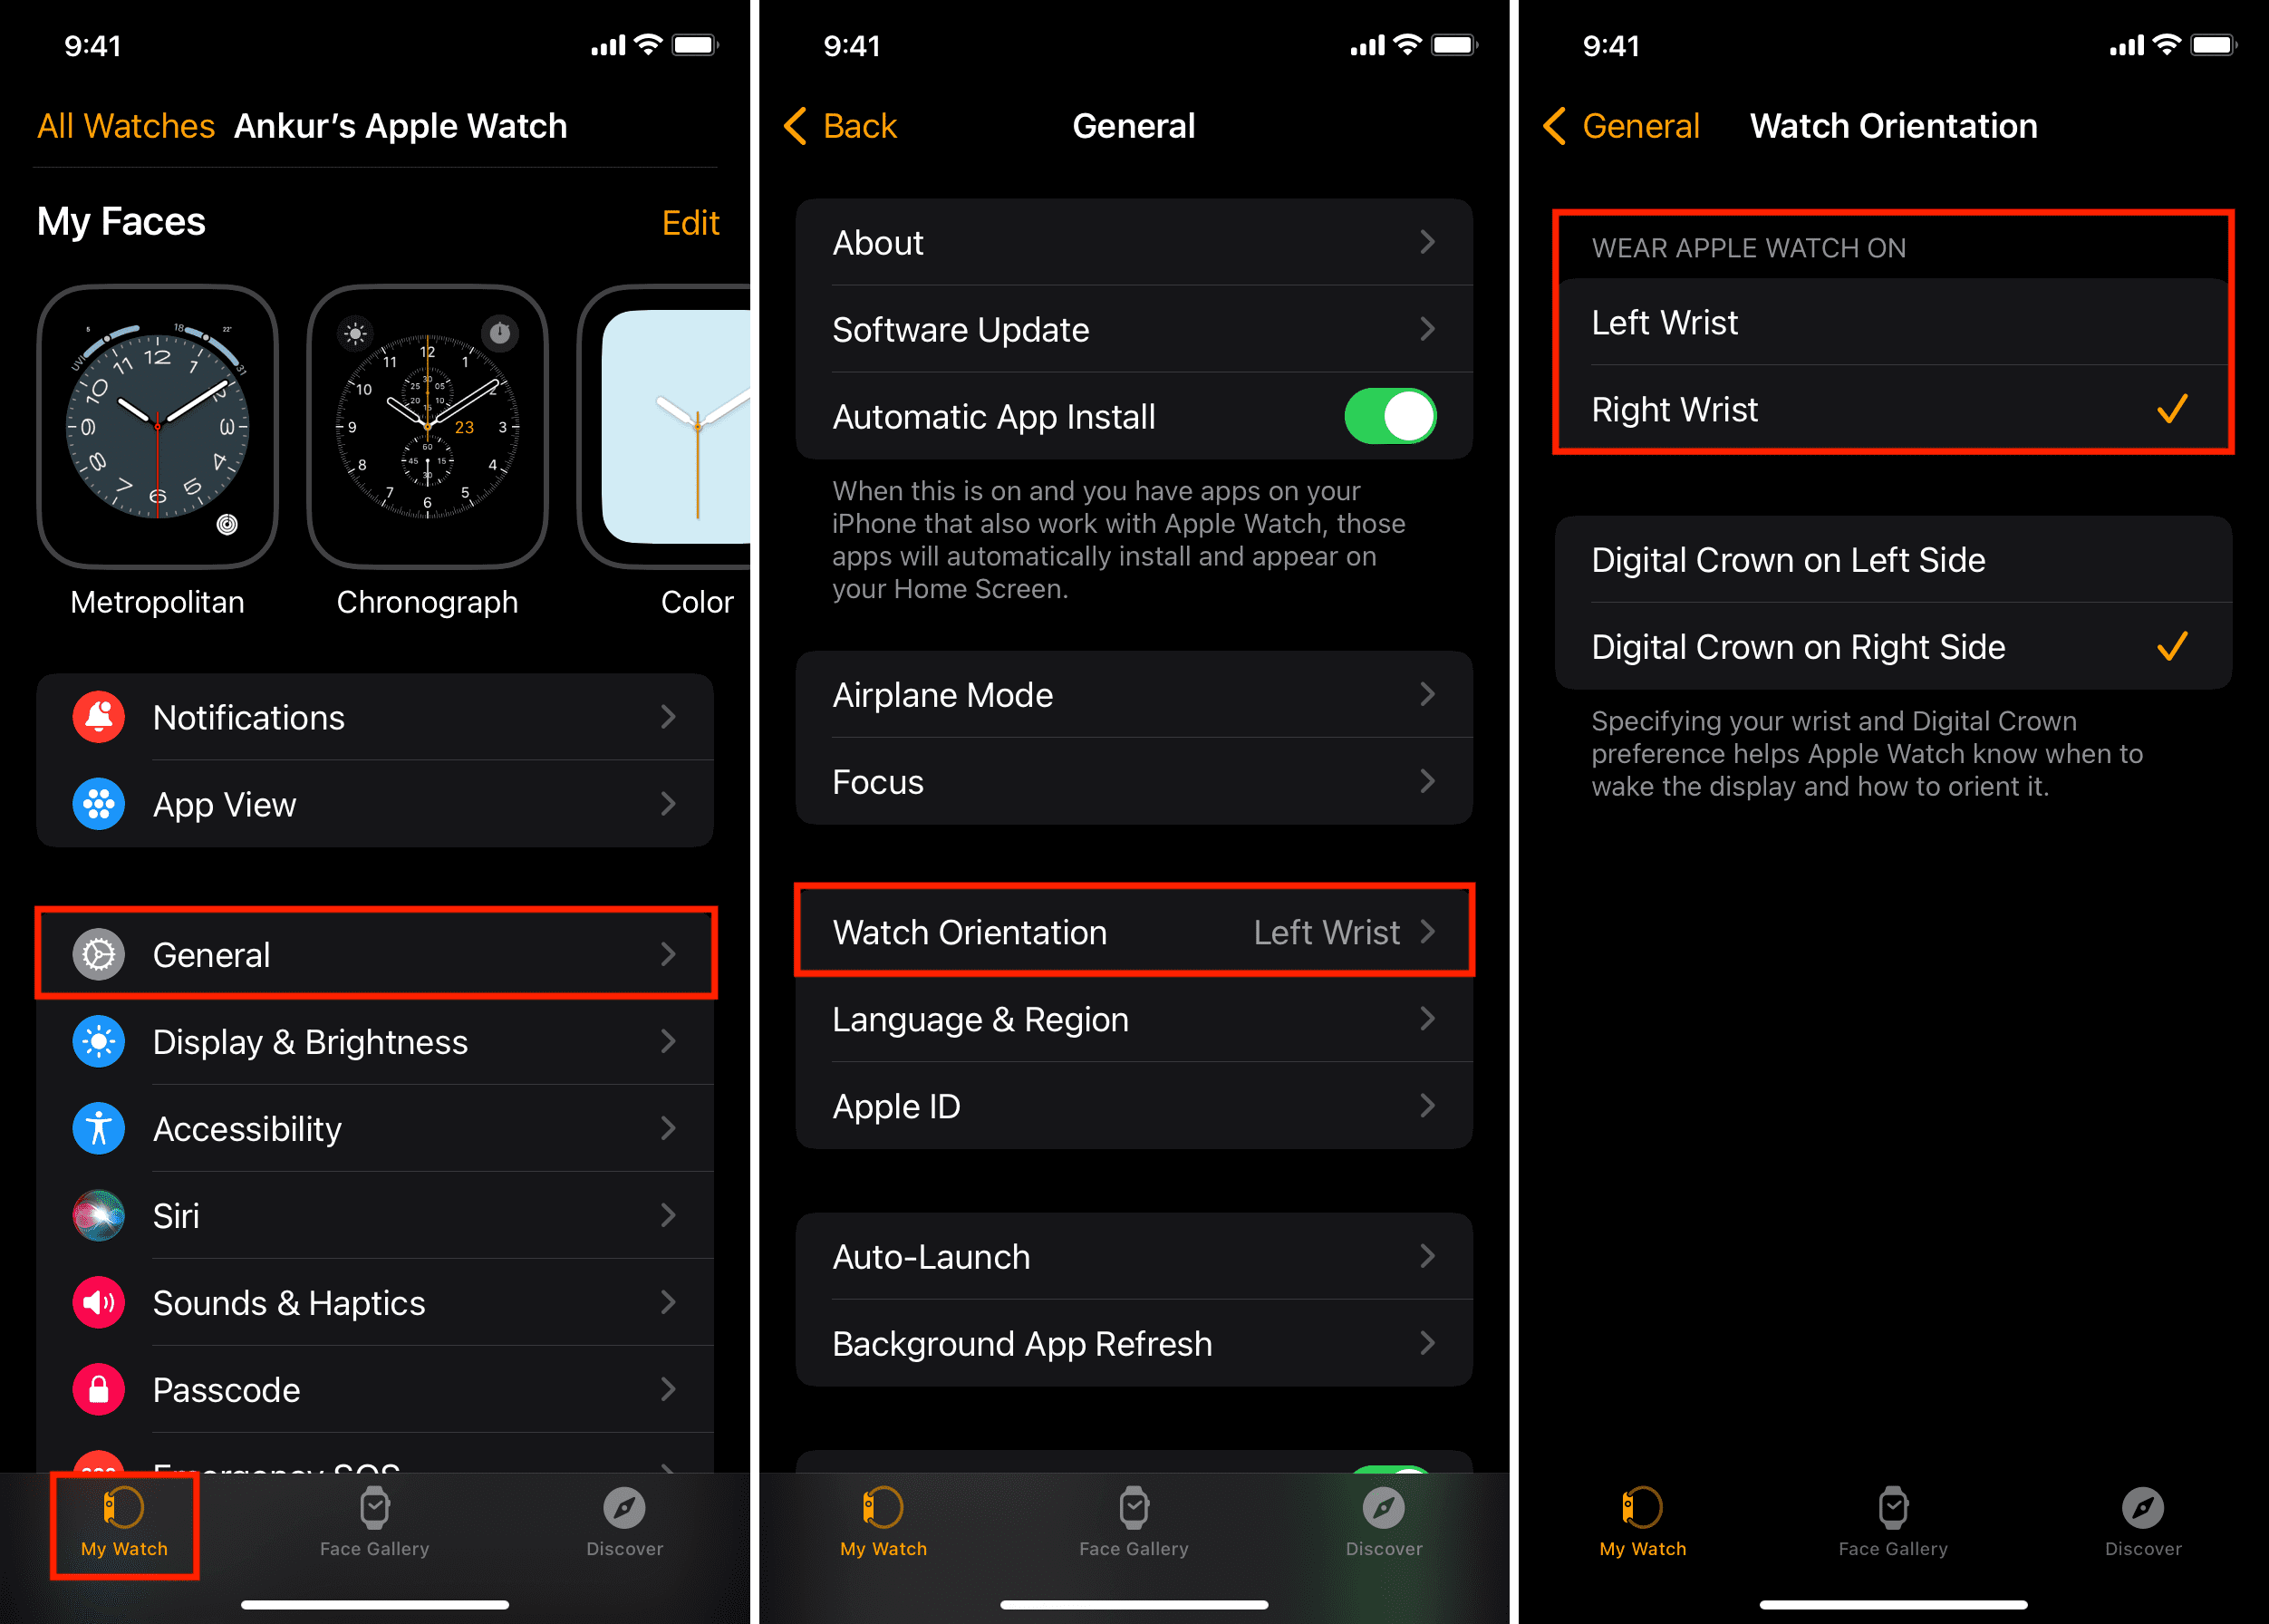 Select Right Wrist in iPhone Watch app Orientation settings